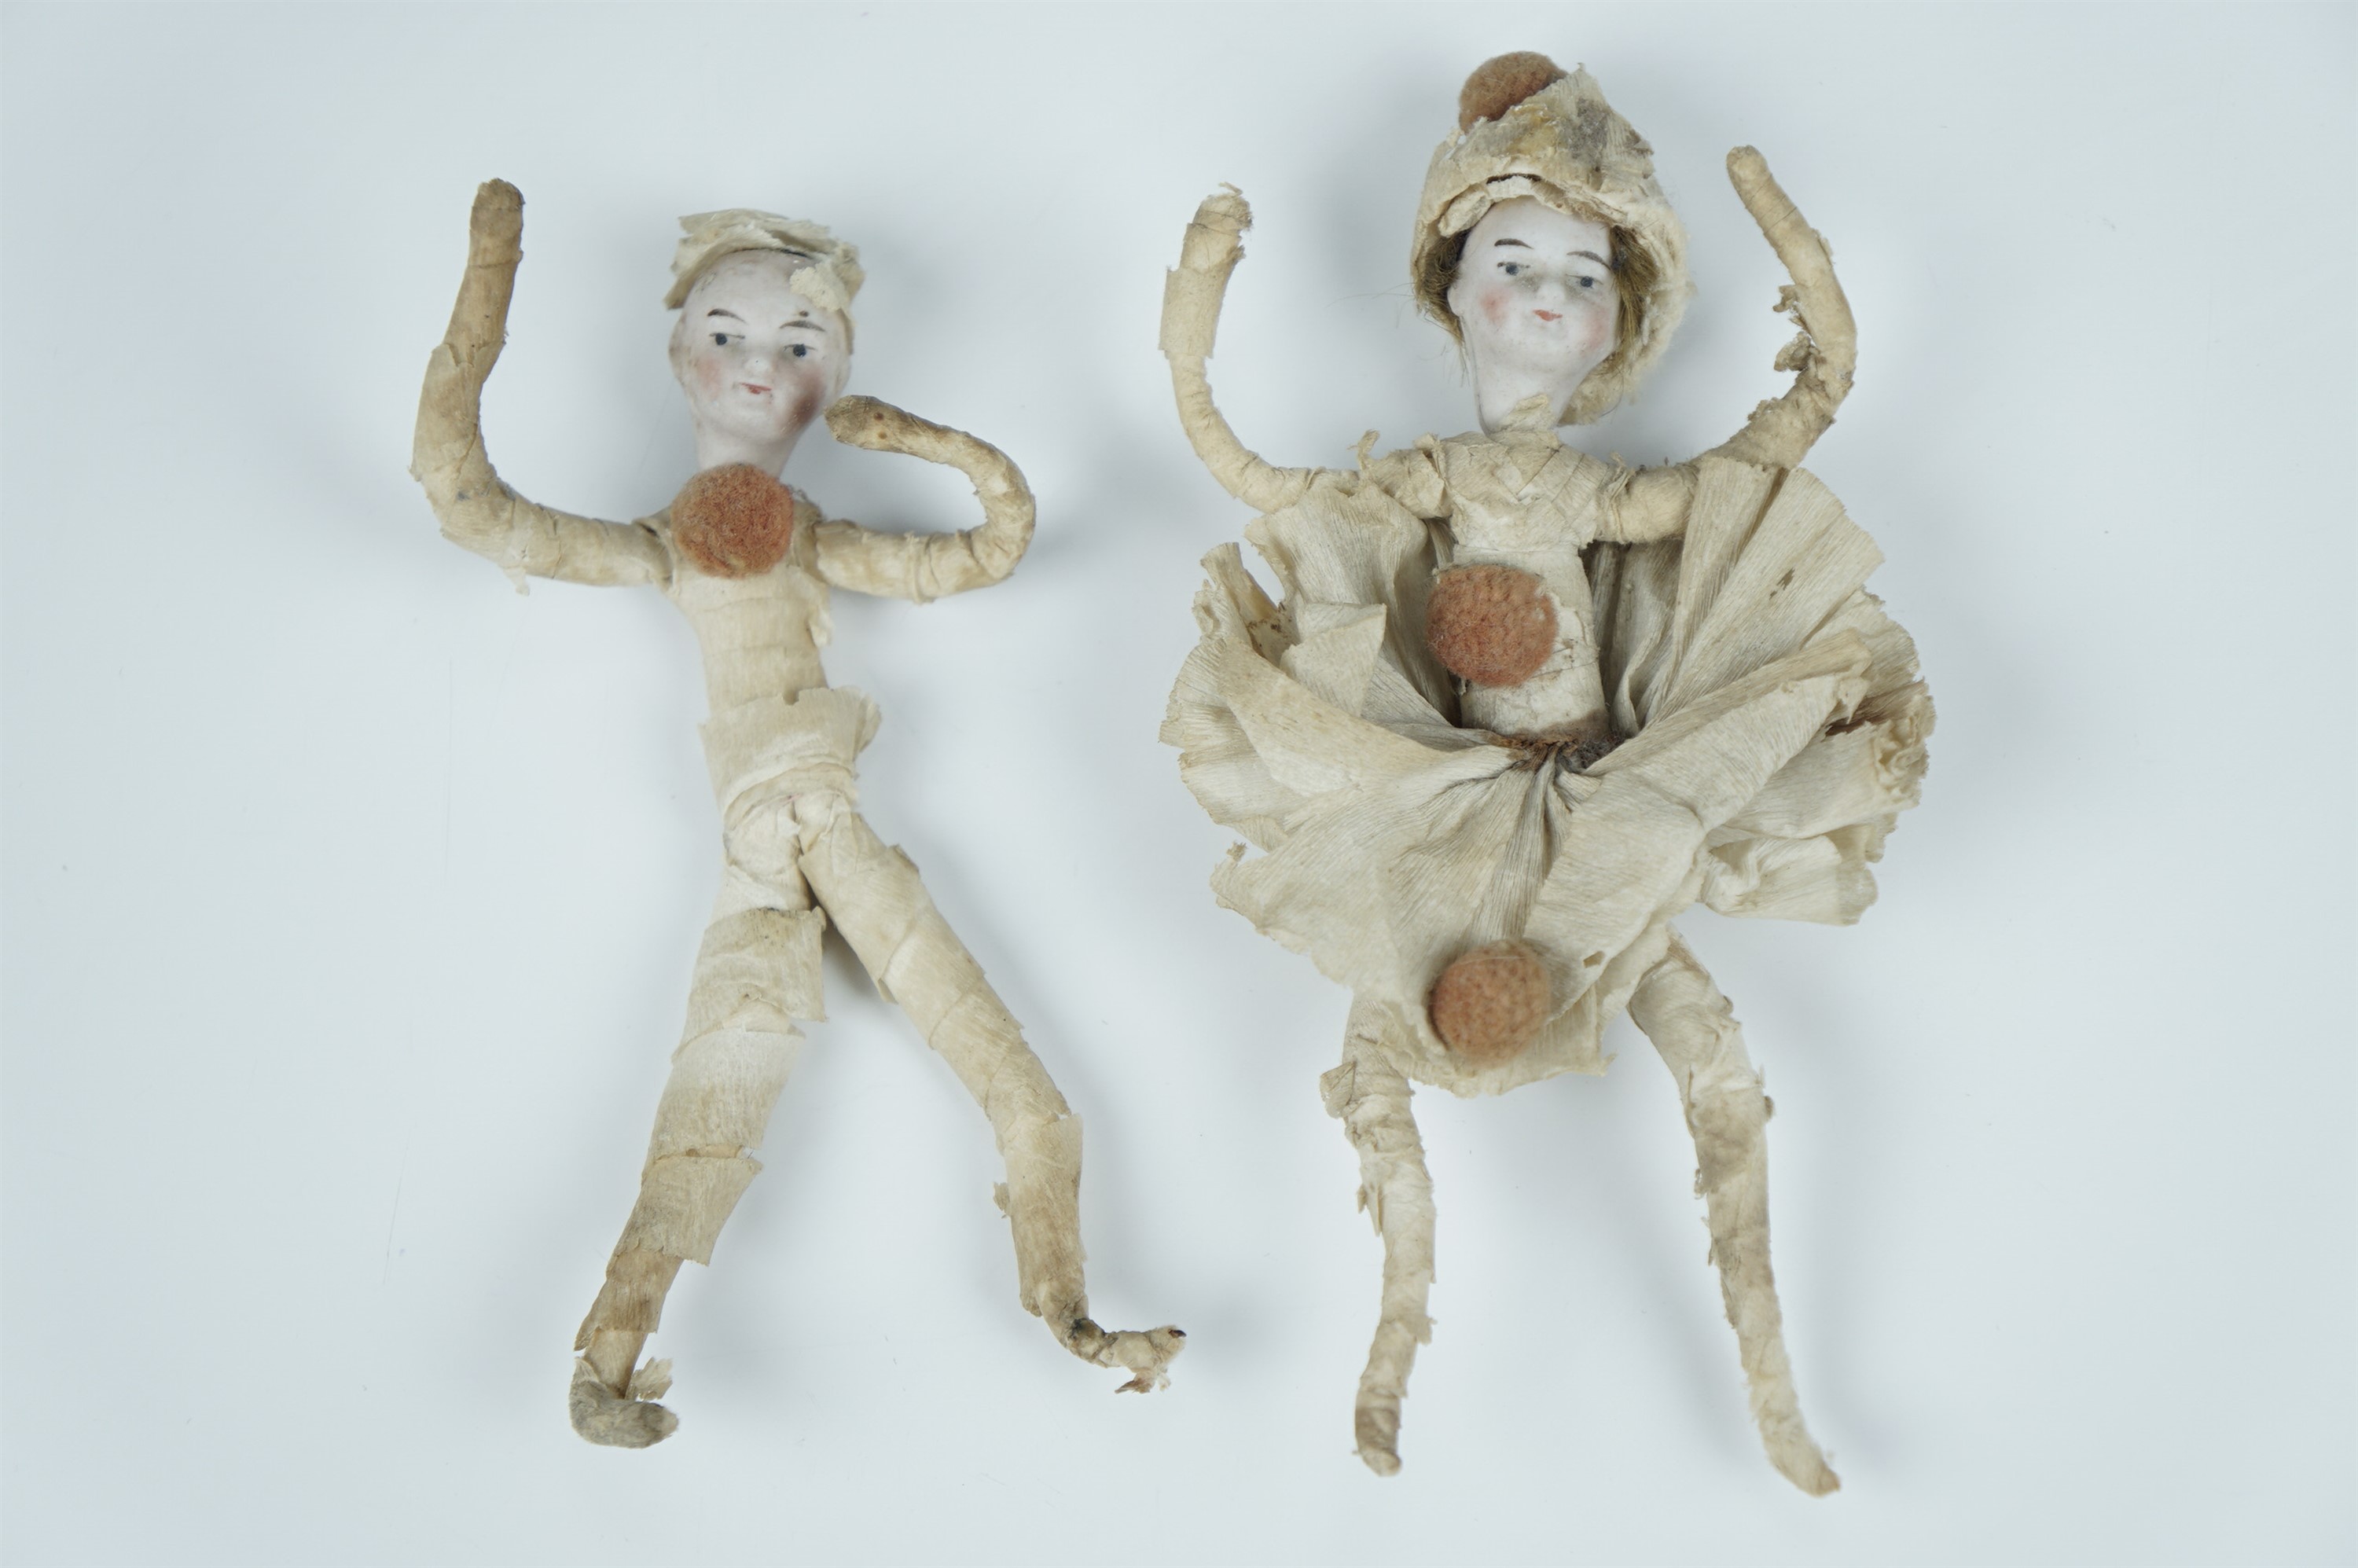 A pair of vintage German Christmas cracker dolls, each having a bisque head and wire armature